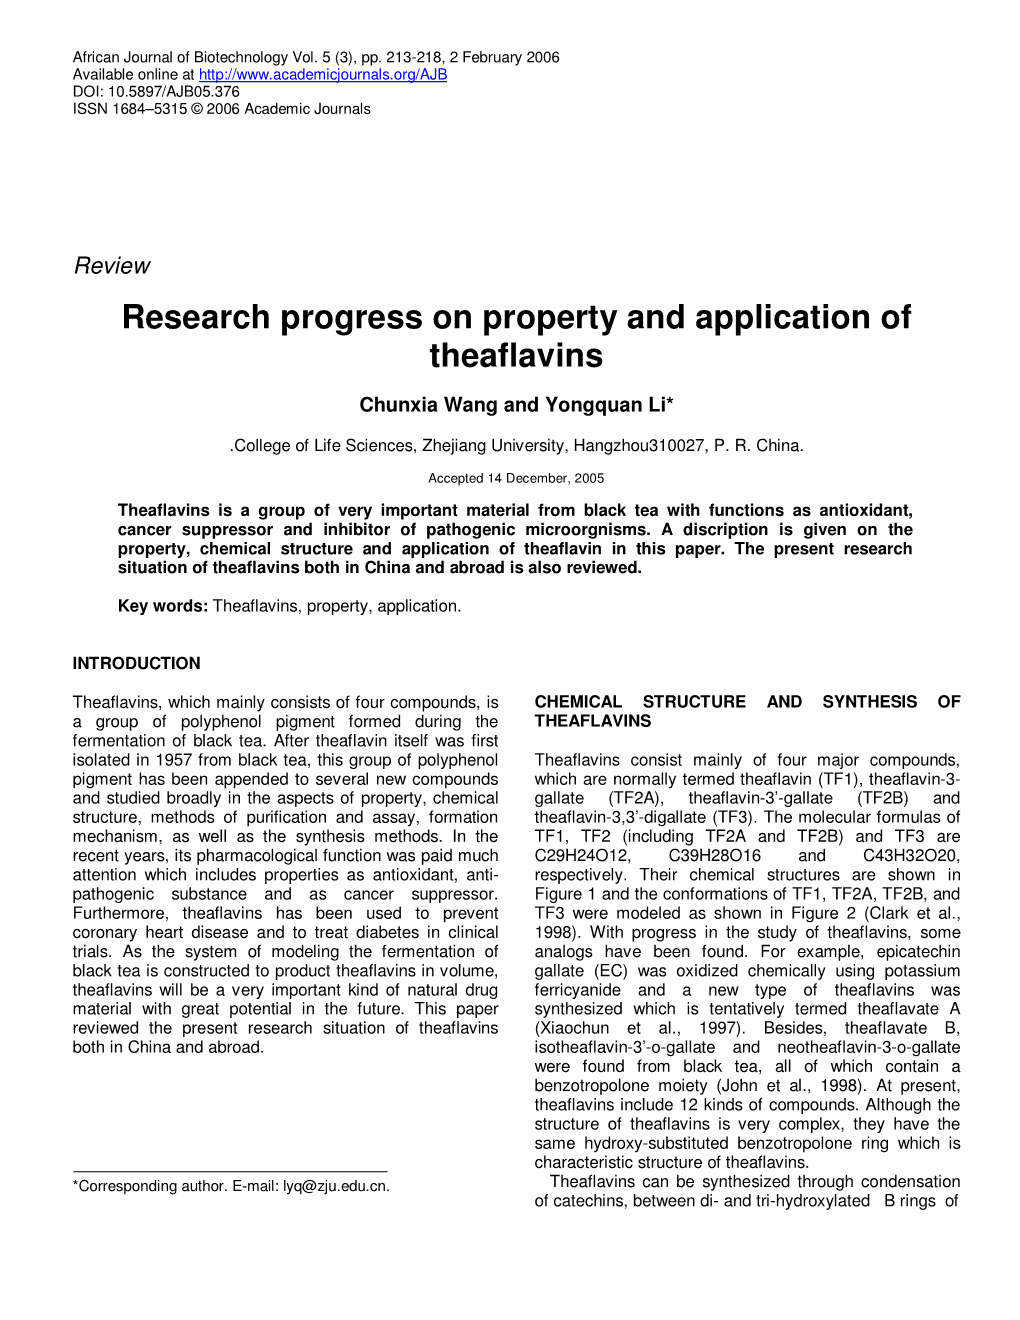 Research Progress on Property and Application of Theaflavins